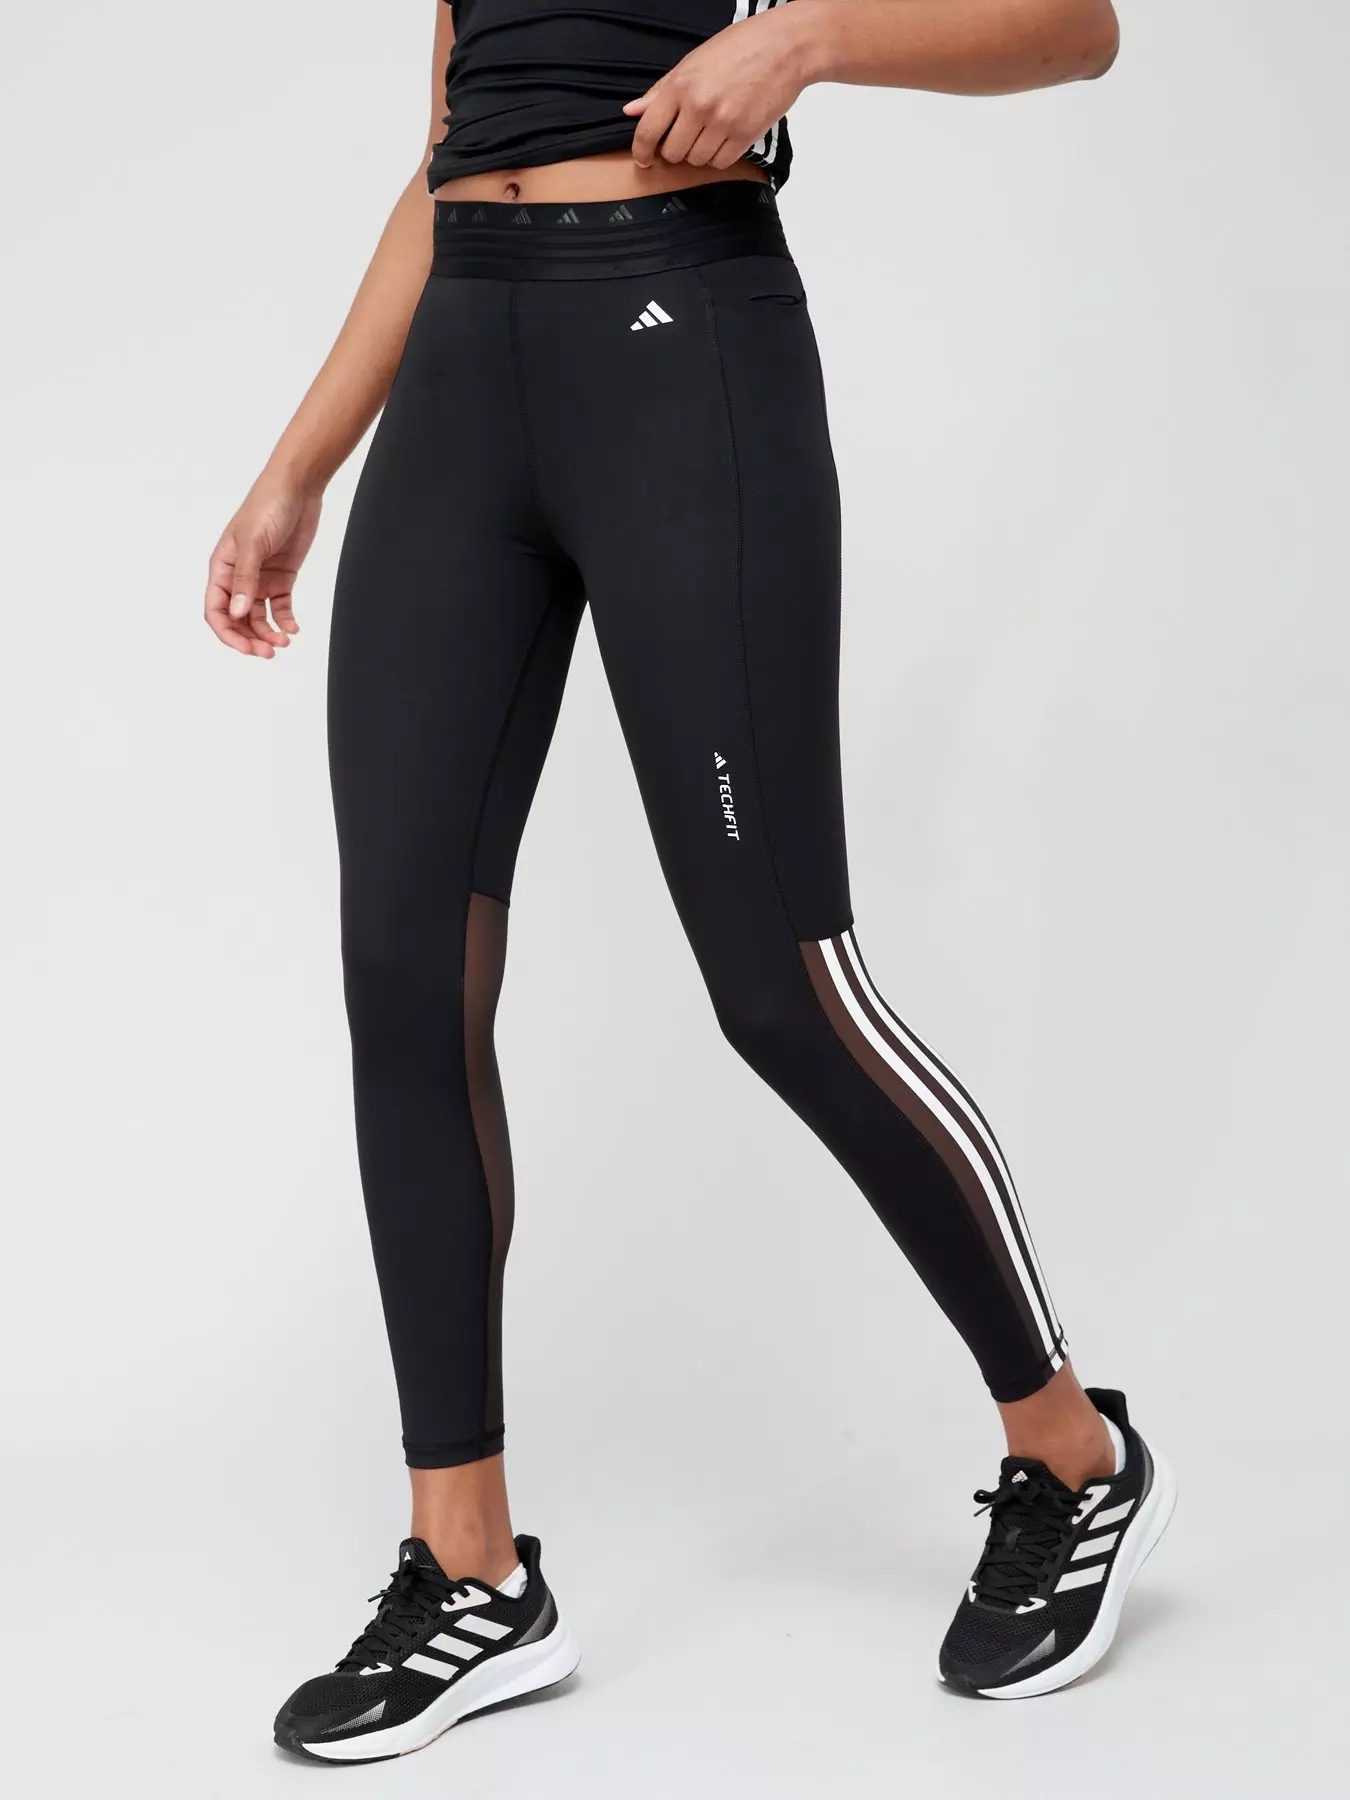 adidas, Pants & Jumpsuits, Adidas Climalite Modelled Black Capris Workout Running  Tights Size Small